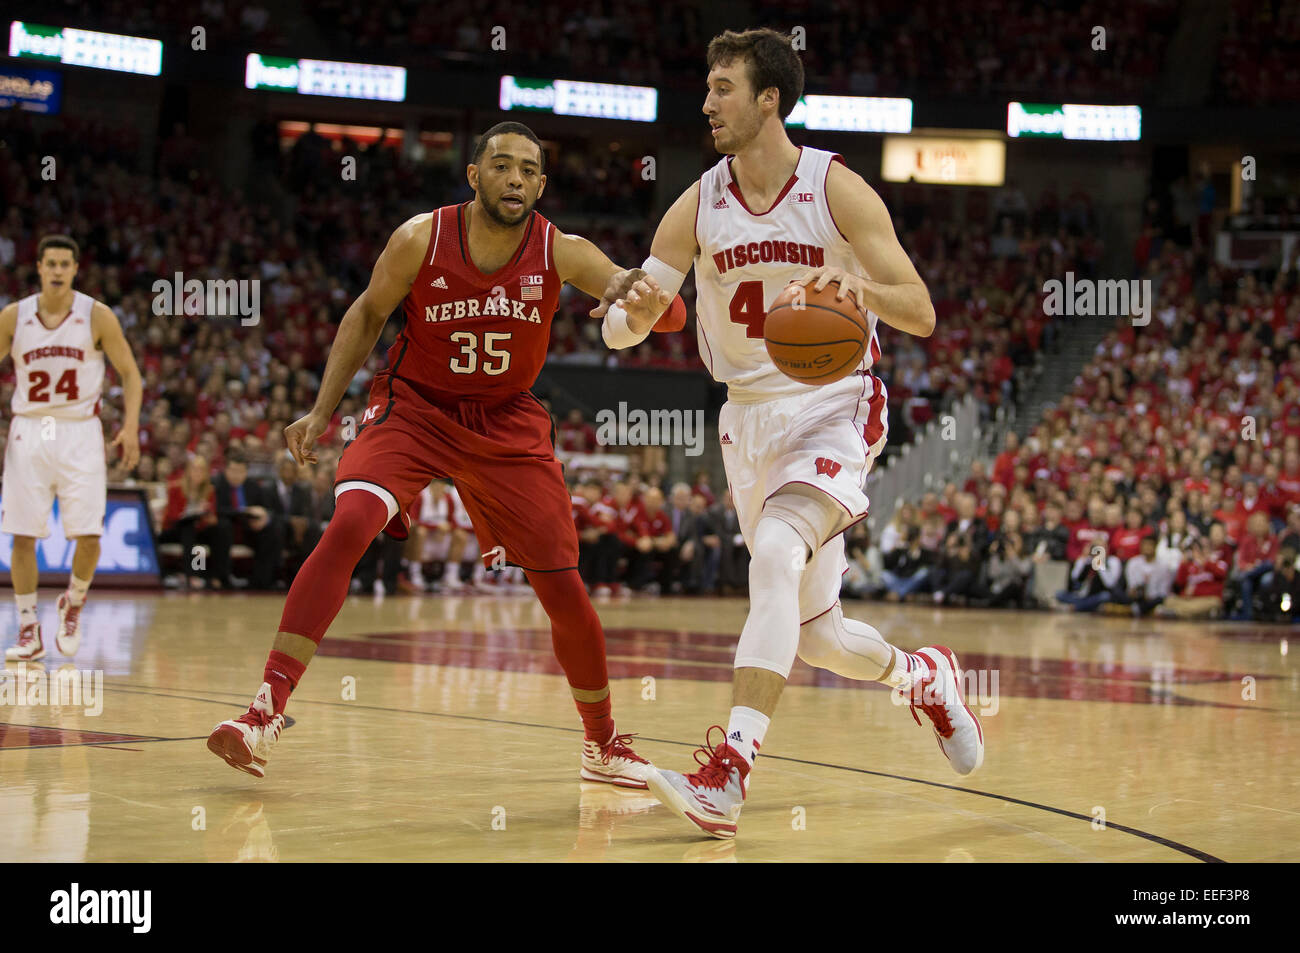 January 15, 2015: Wisconsin Badgers forward Frank Kaminsky #44 dribbles while being guarded by Nebraska Cornhuskers forward Walter Pitchford #35 during the NCAA Basketball game between the Wisconsin Badgers and Nebraska Cornhuskers at the Kohl Center in Madison, WI. Wisconsin defeated Nebraska 70-55. John Fisher/CSM Stock Photo